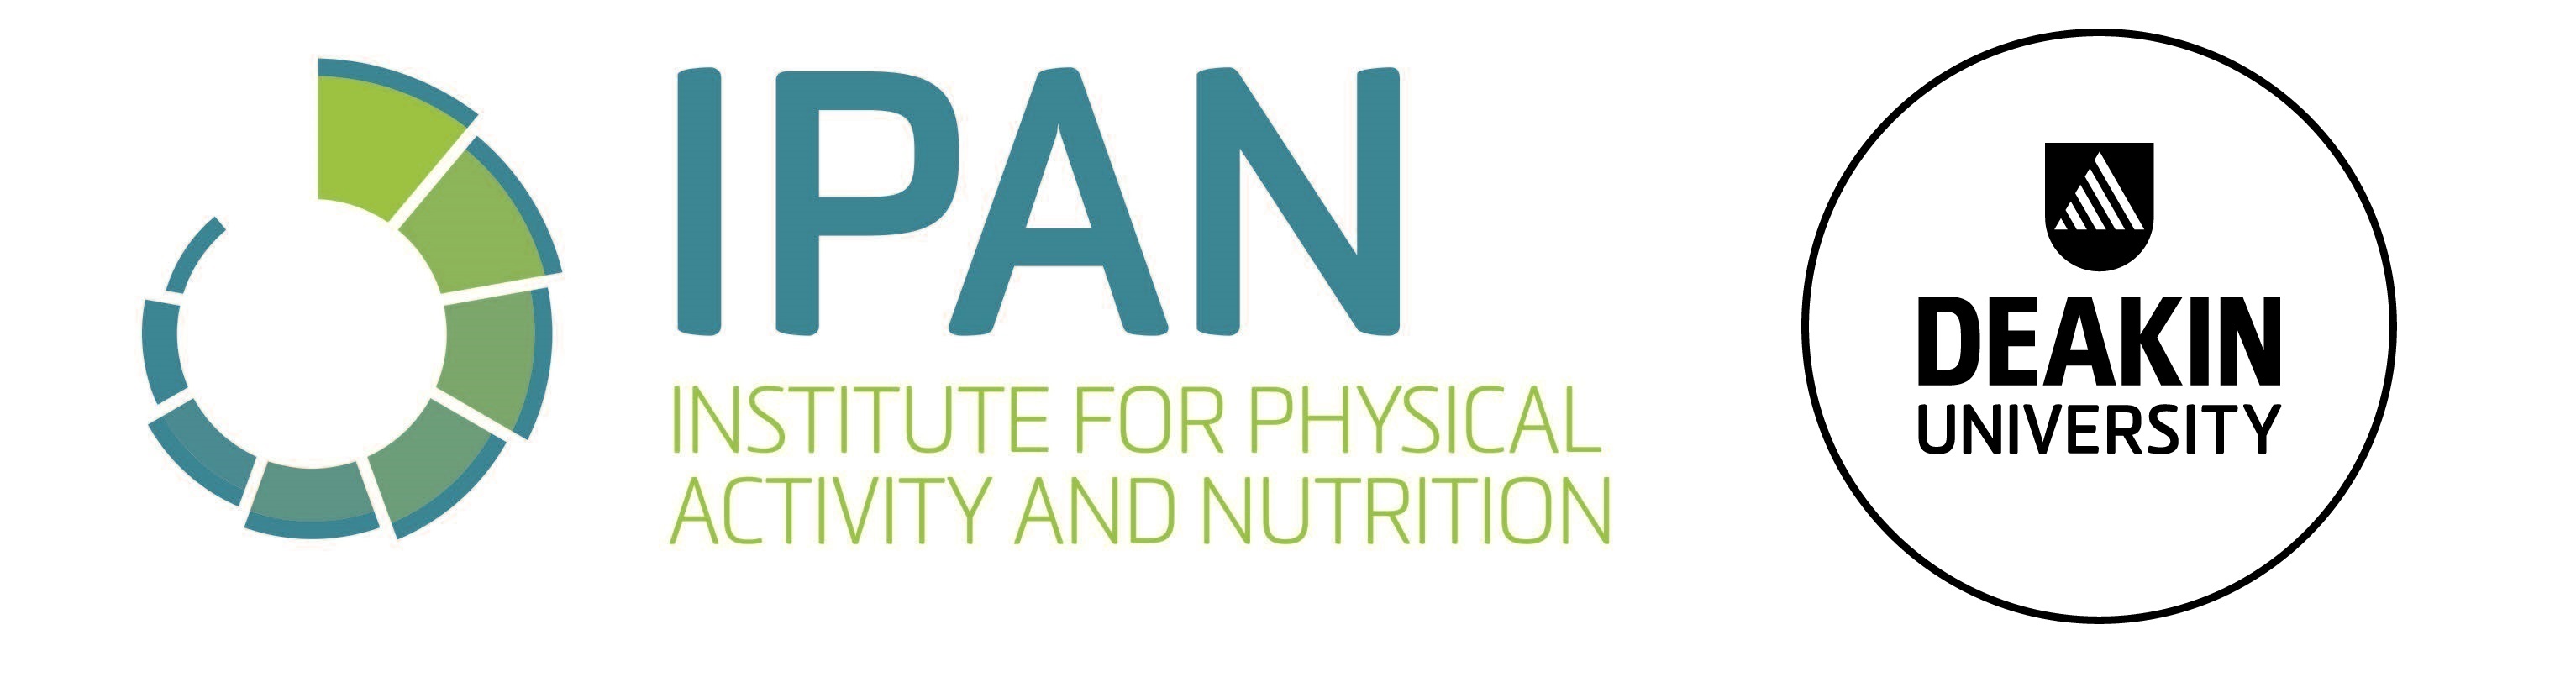 The Institute for Physical Activity and Nutrition, IPAN